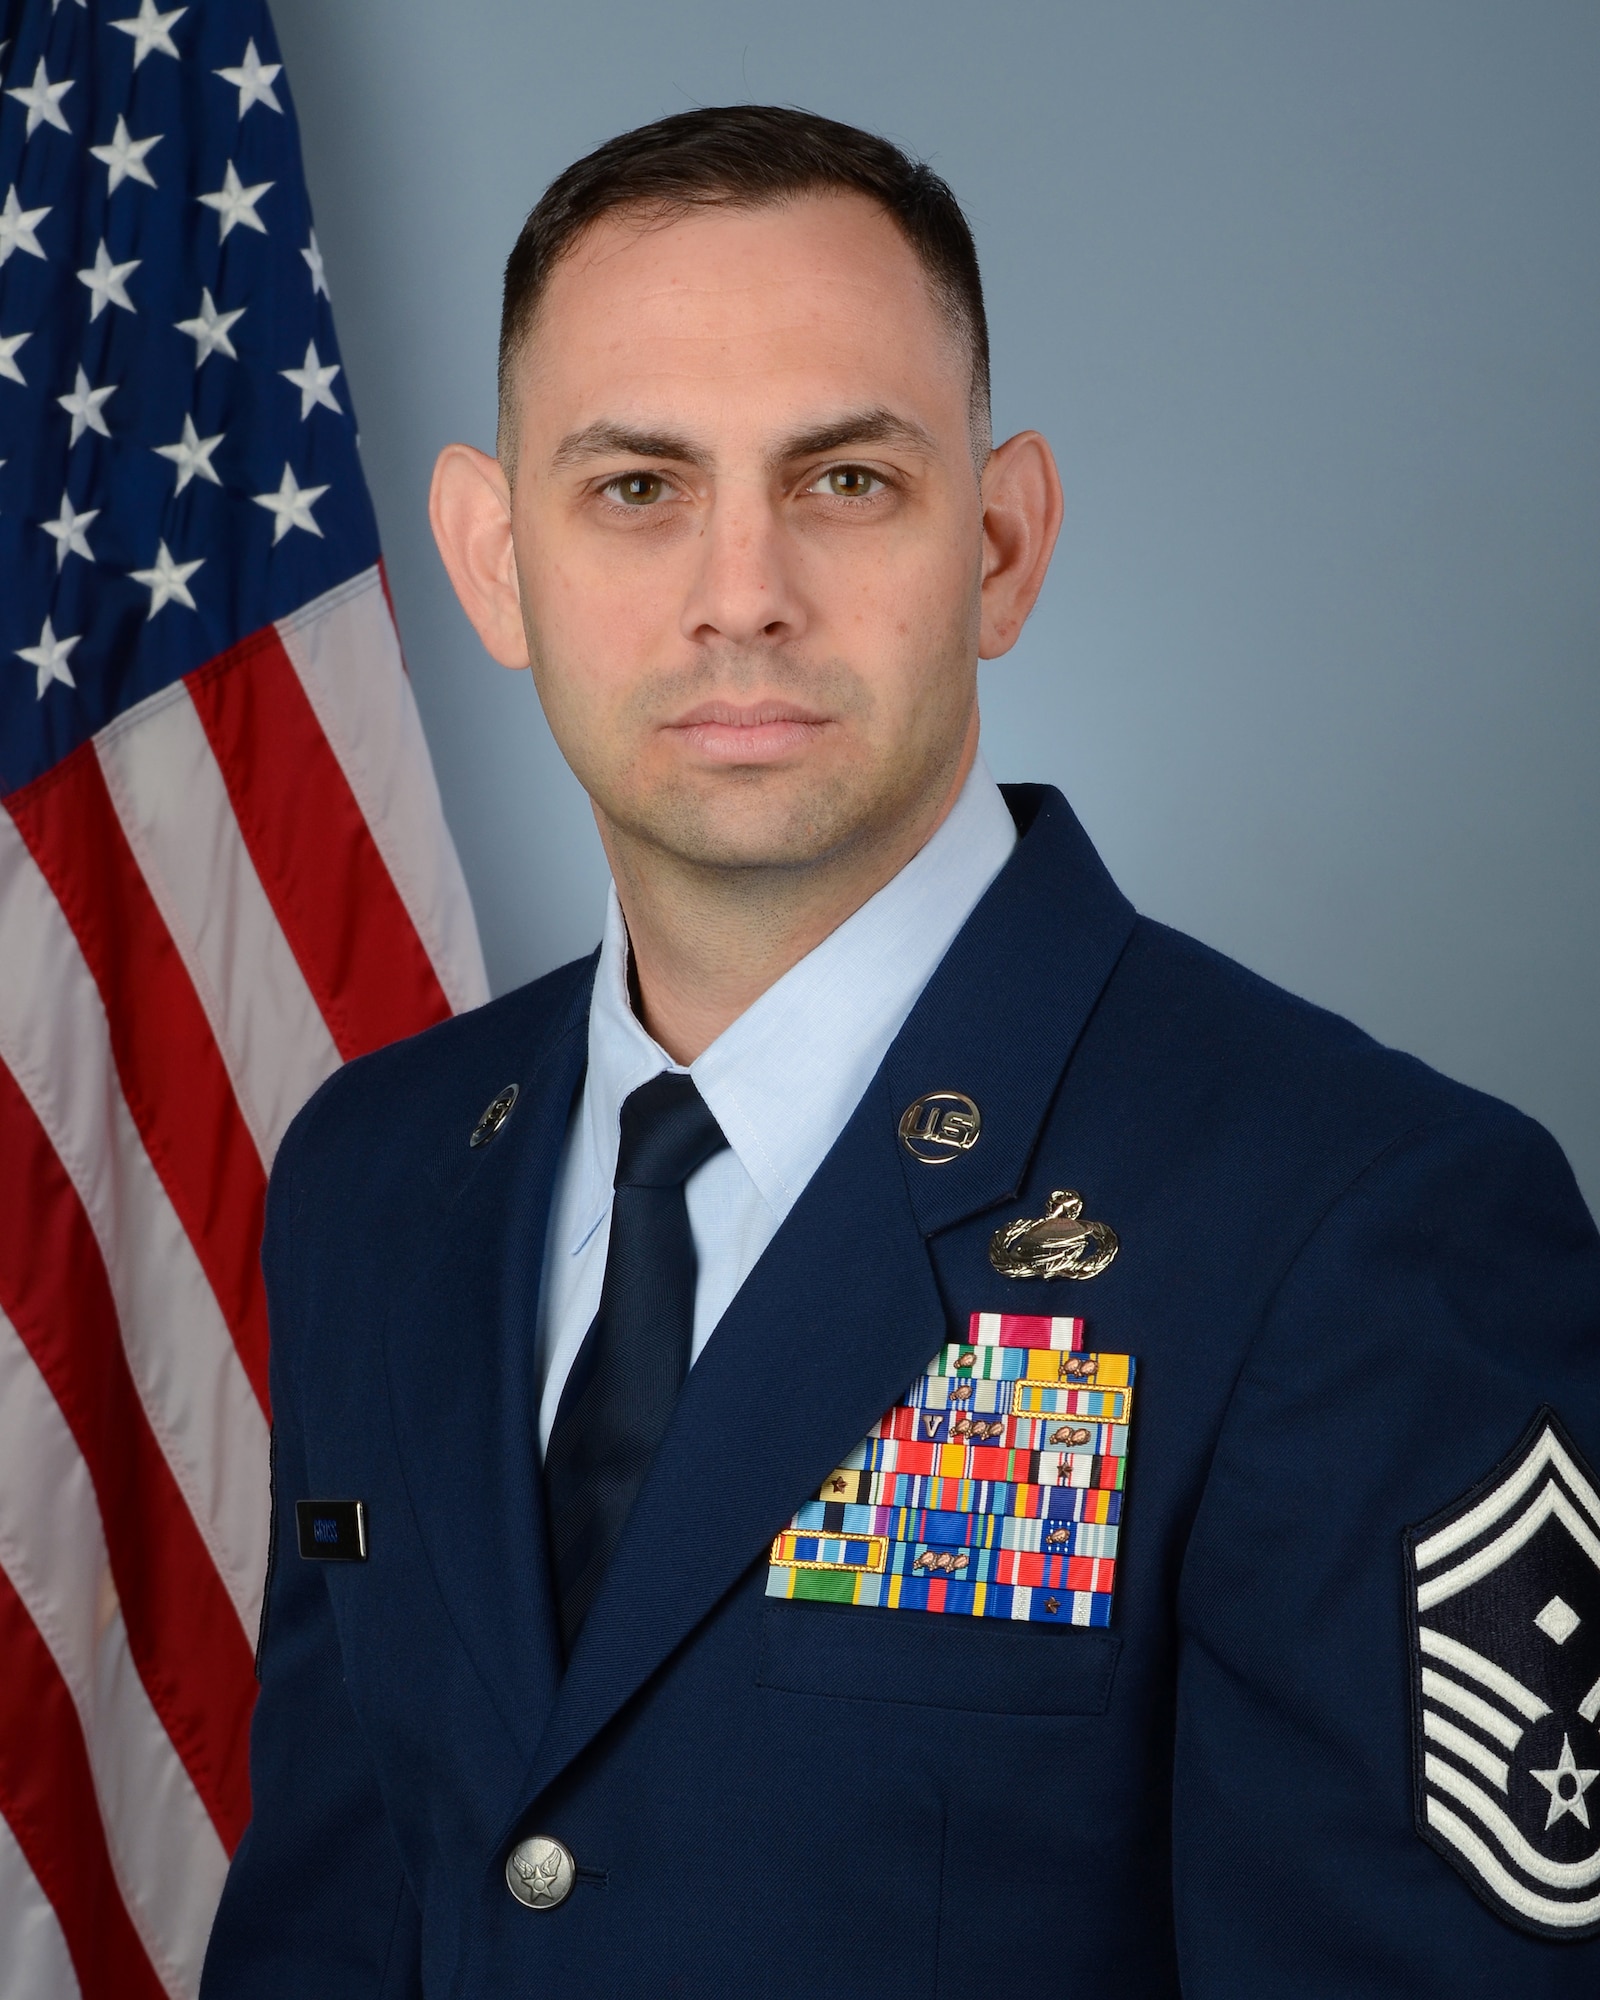 U.S. Air Force Senior Master Sgt. Alex Gross, the first sergeant assigned to the 169th Fighetr Wing, at McEntire Joint National Guard Base, S.C, March 2, 2018. (U.S. Air National Guard photo by Senior Airman Megan Floyd)